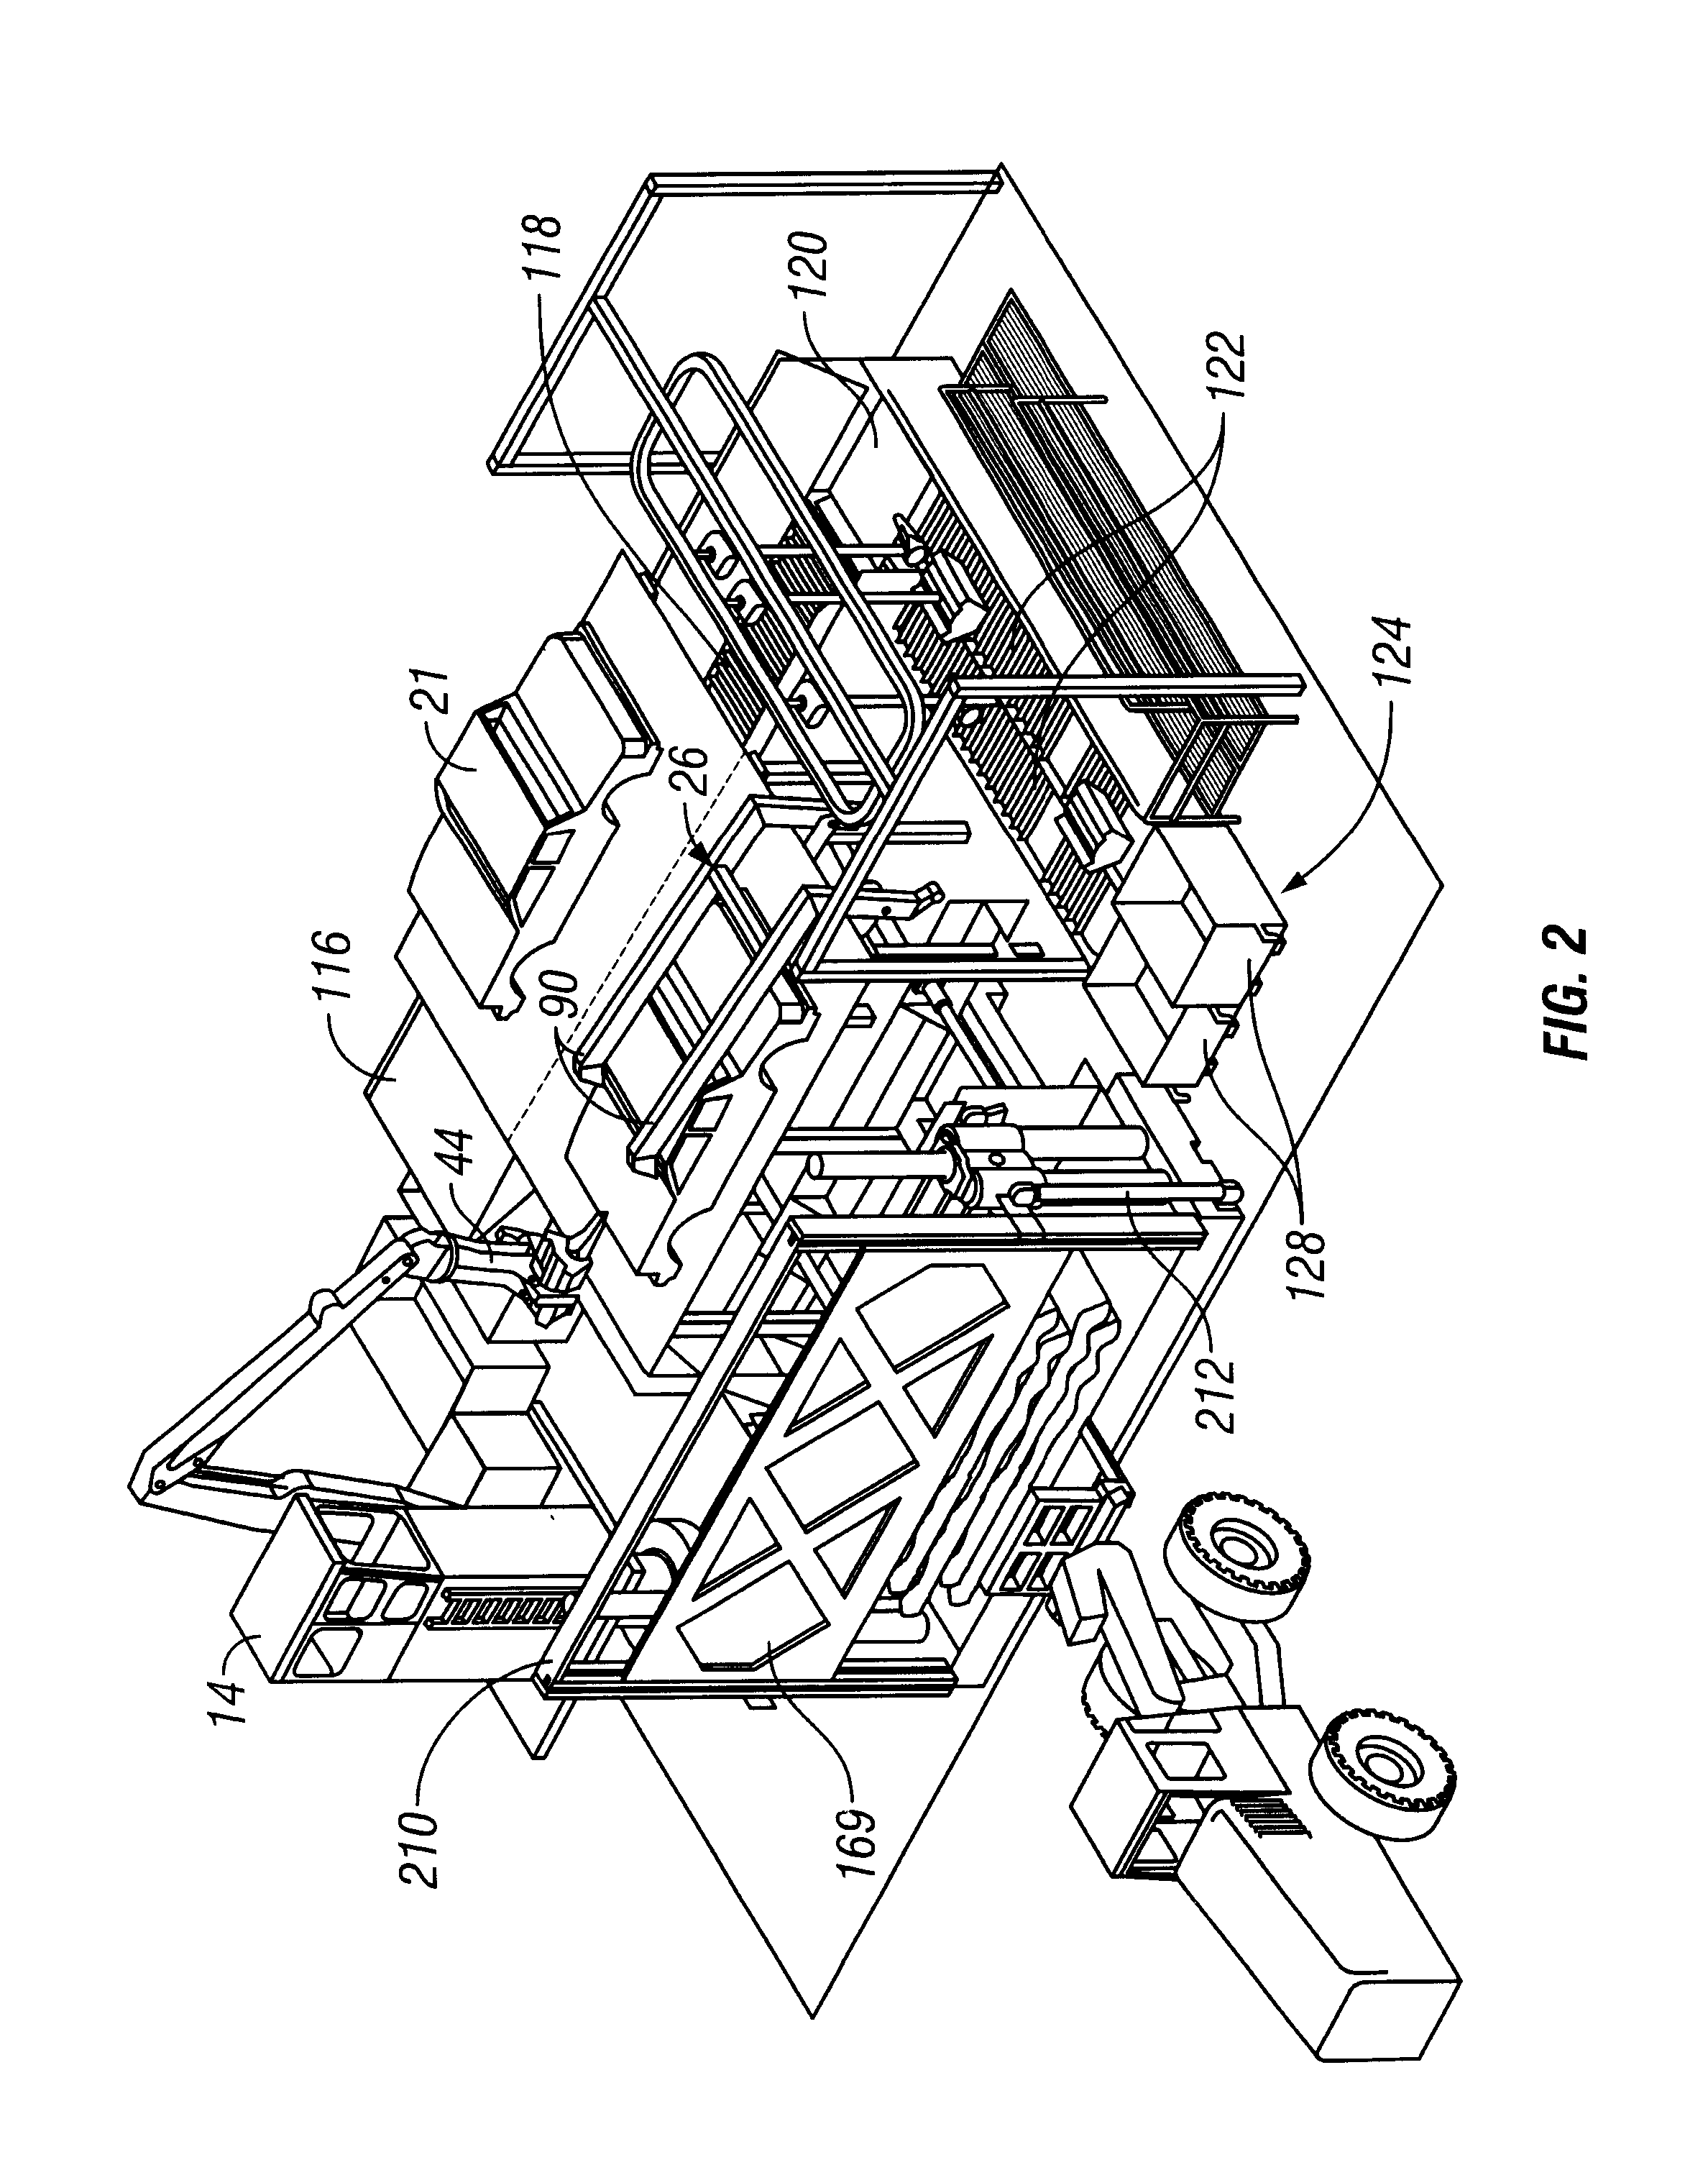 Vehicle recycling system and method